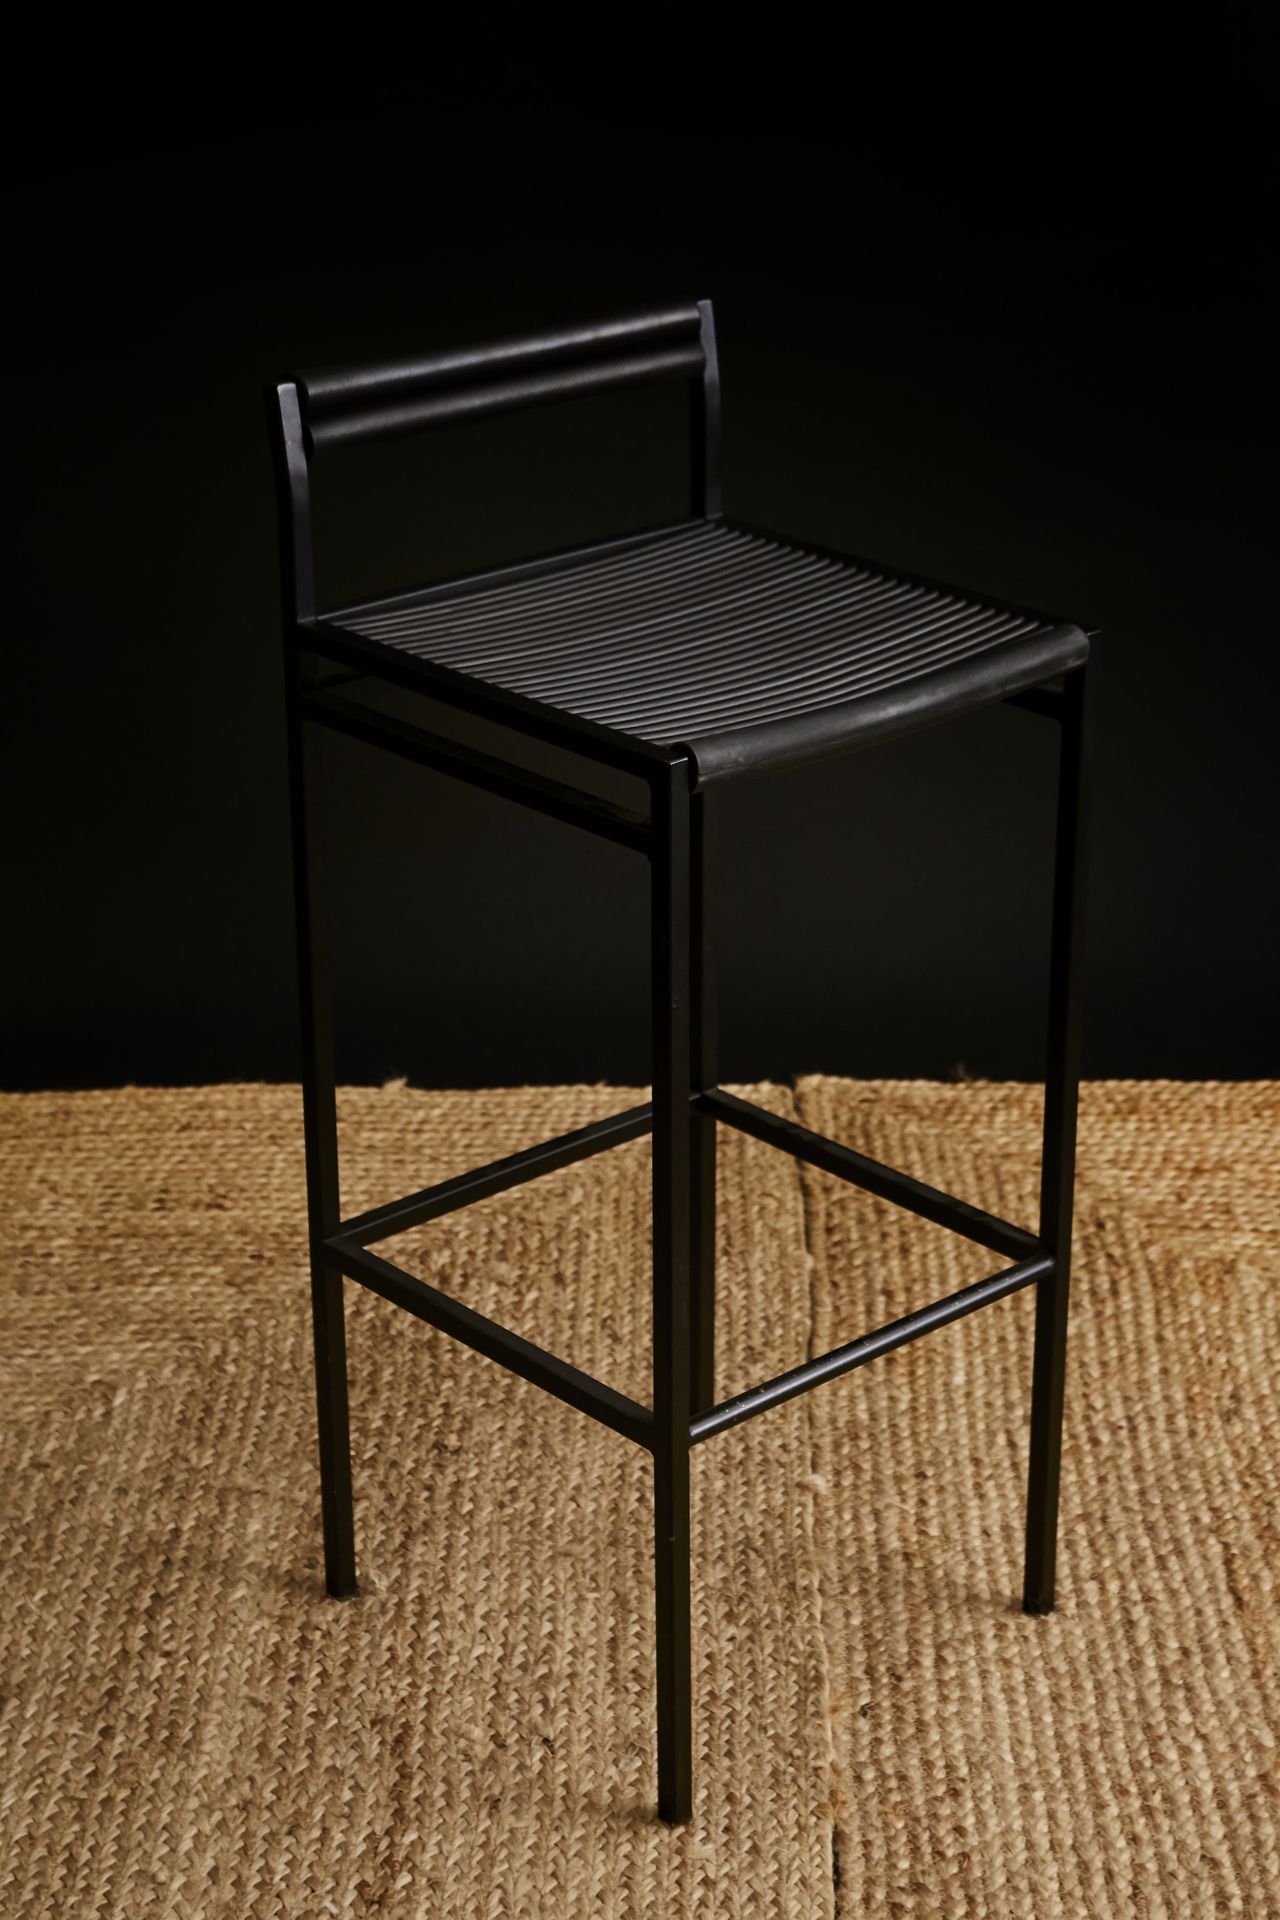 TRAVAIL JAPONAIS Stool---
Lacquered metal and foam
Date of creation : around 198&hellip;